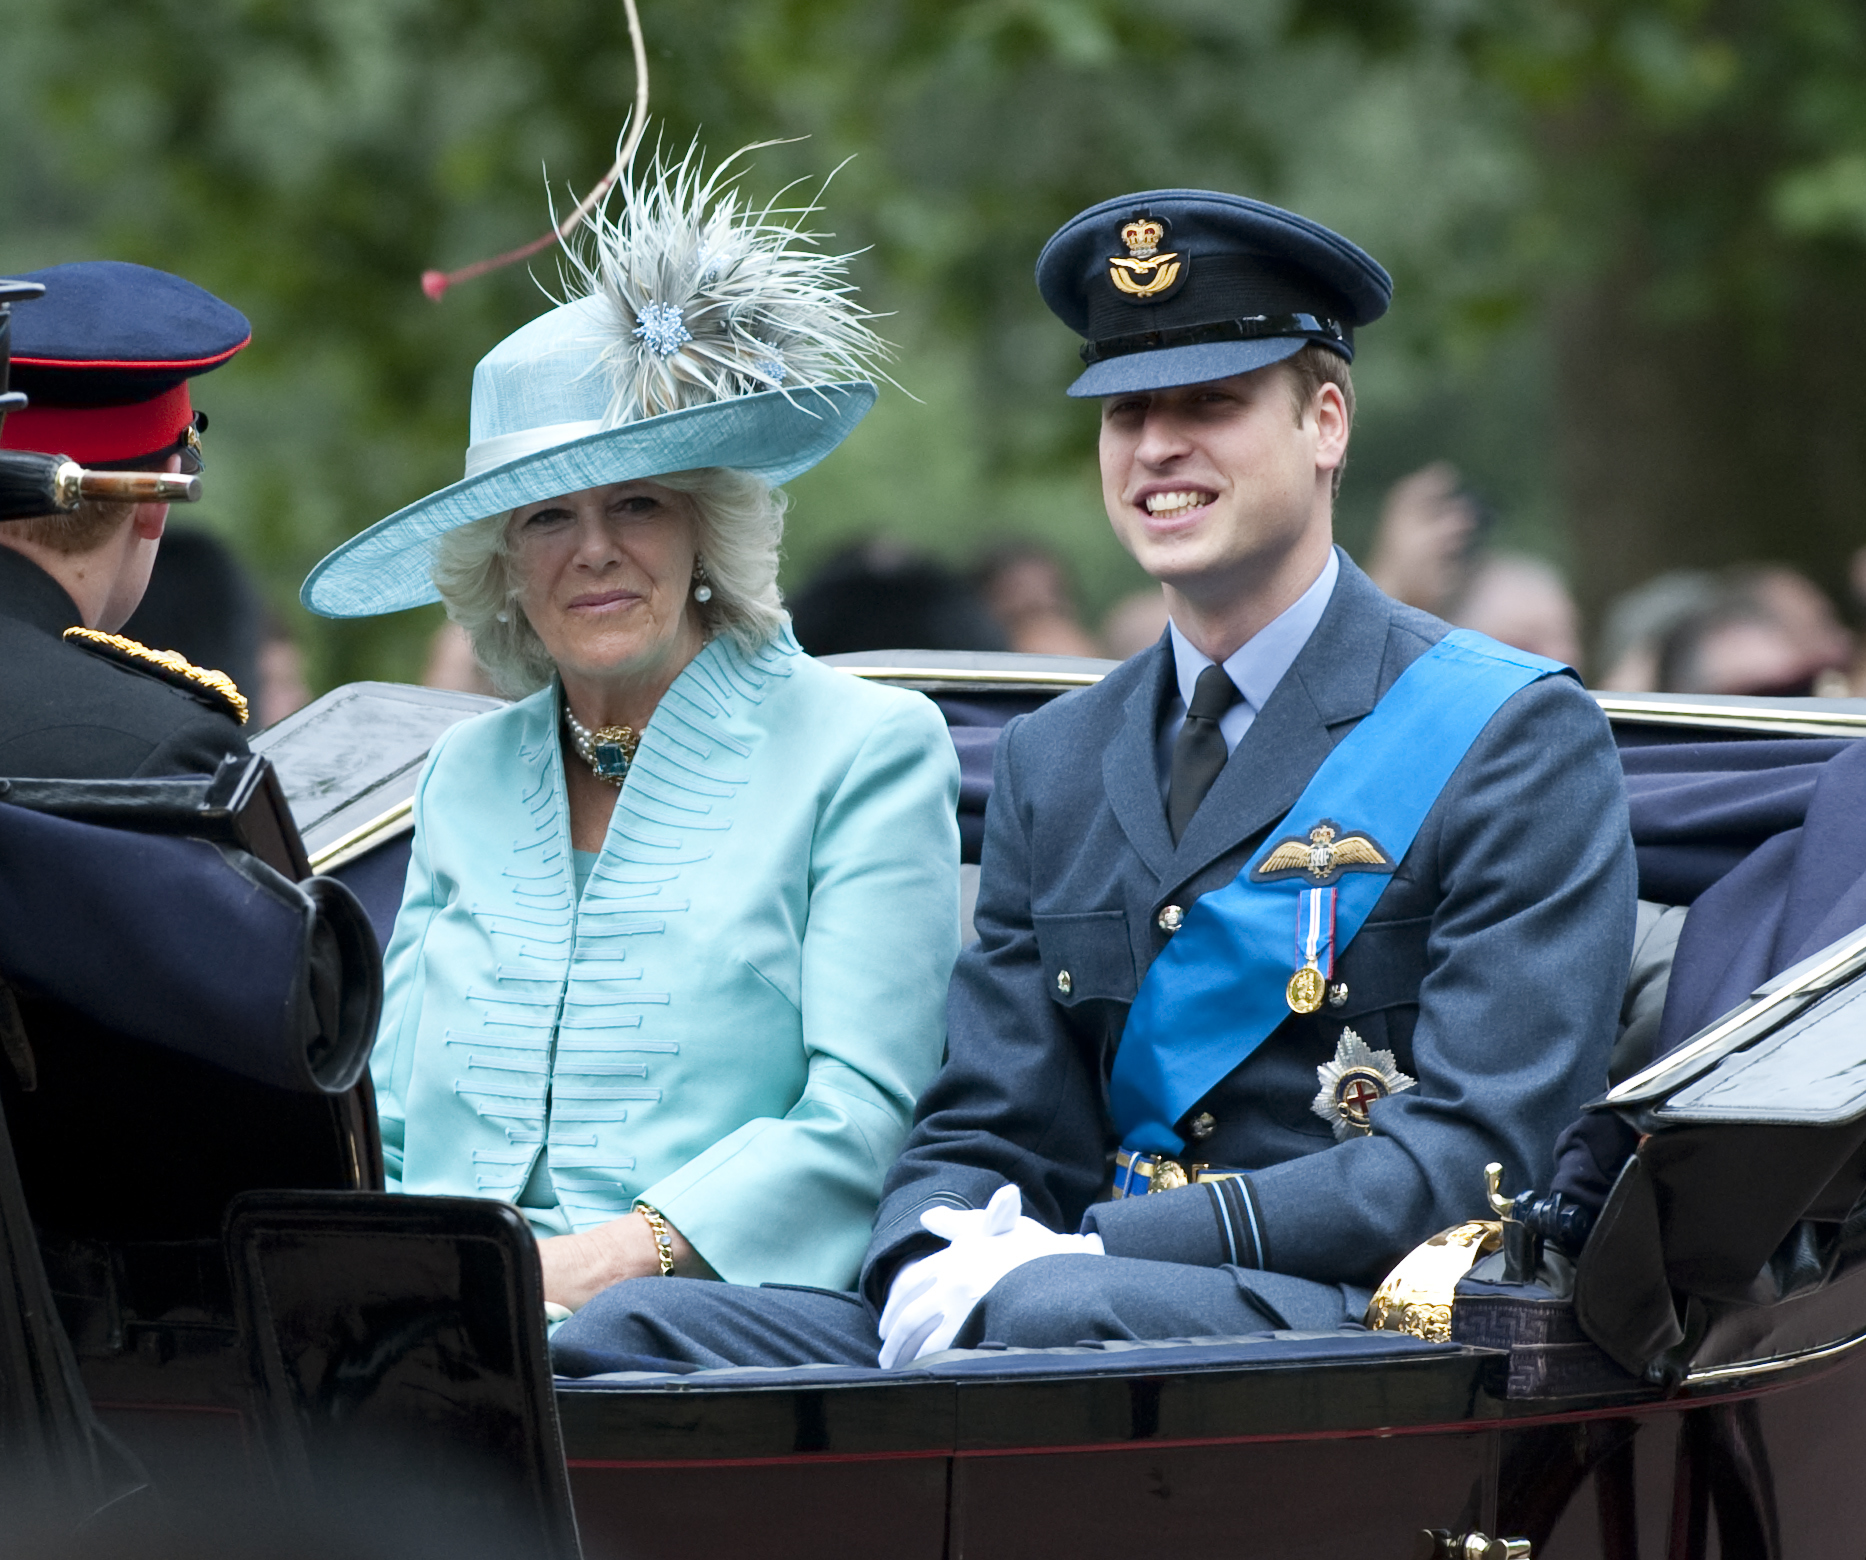 Queen Camilla and Prince William at the Trooping The Colour event in 2009. | Source: Getty Images